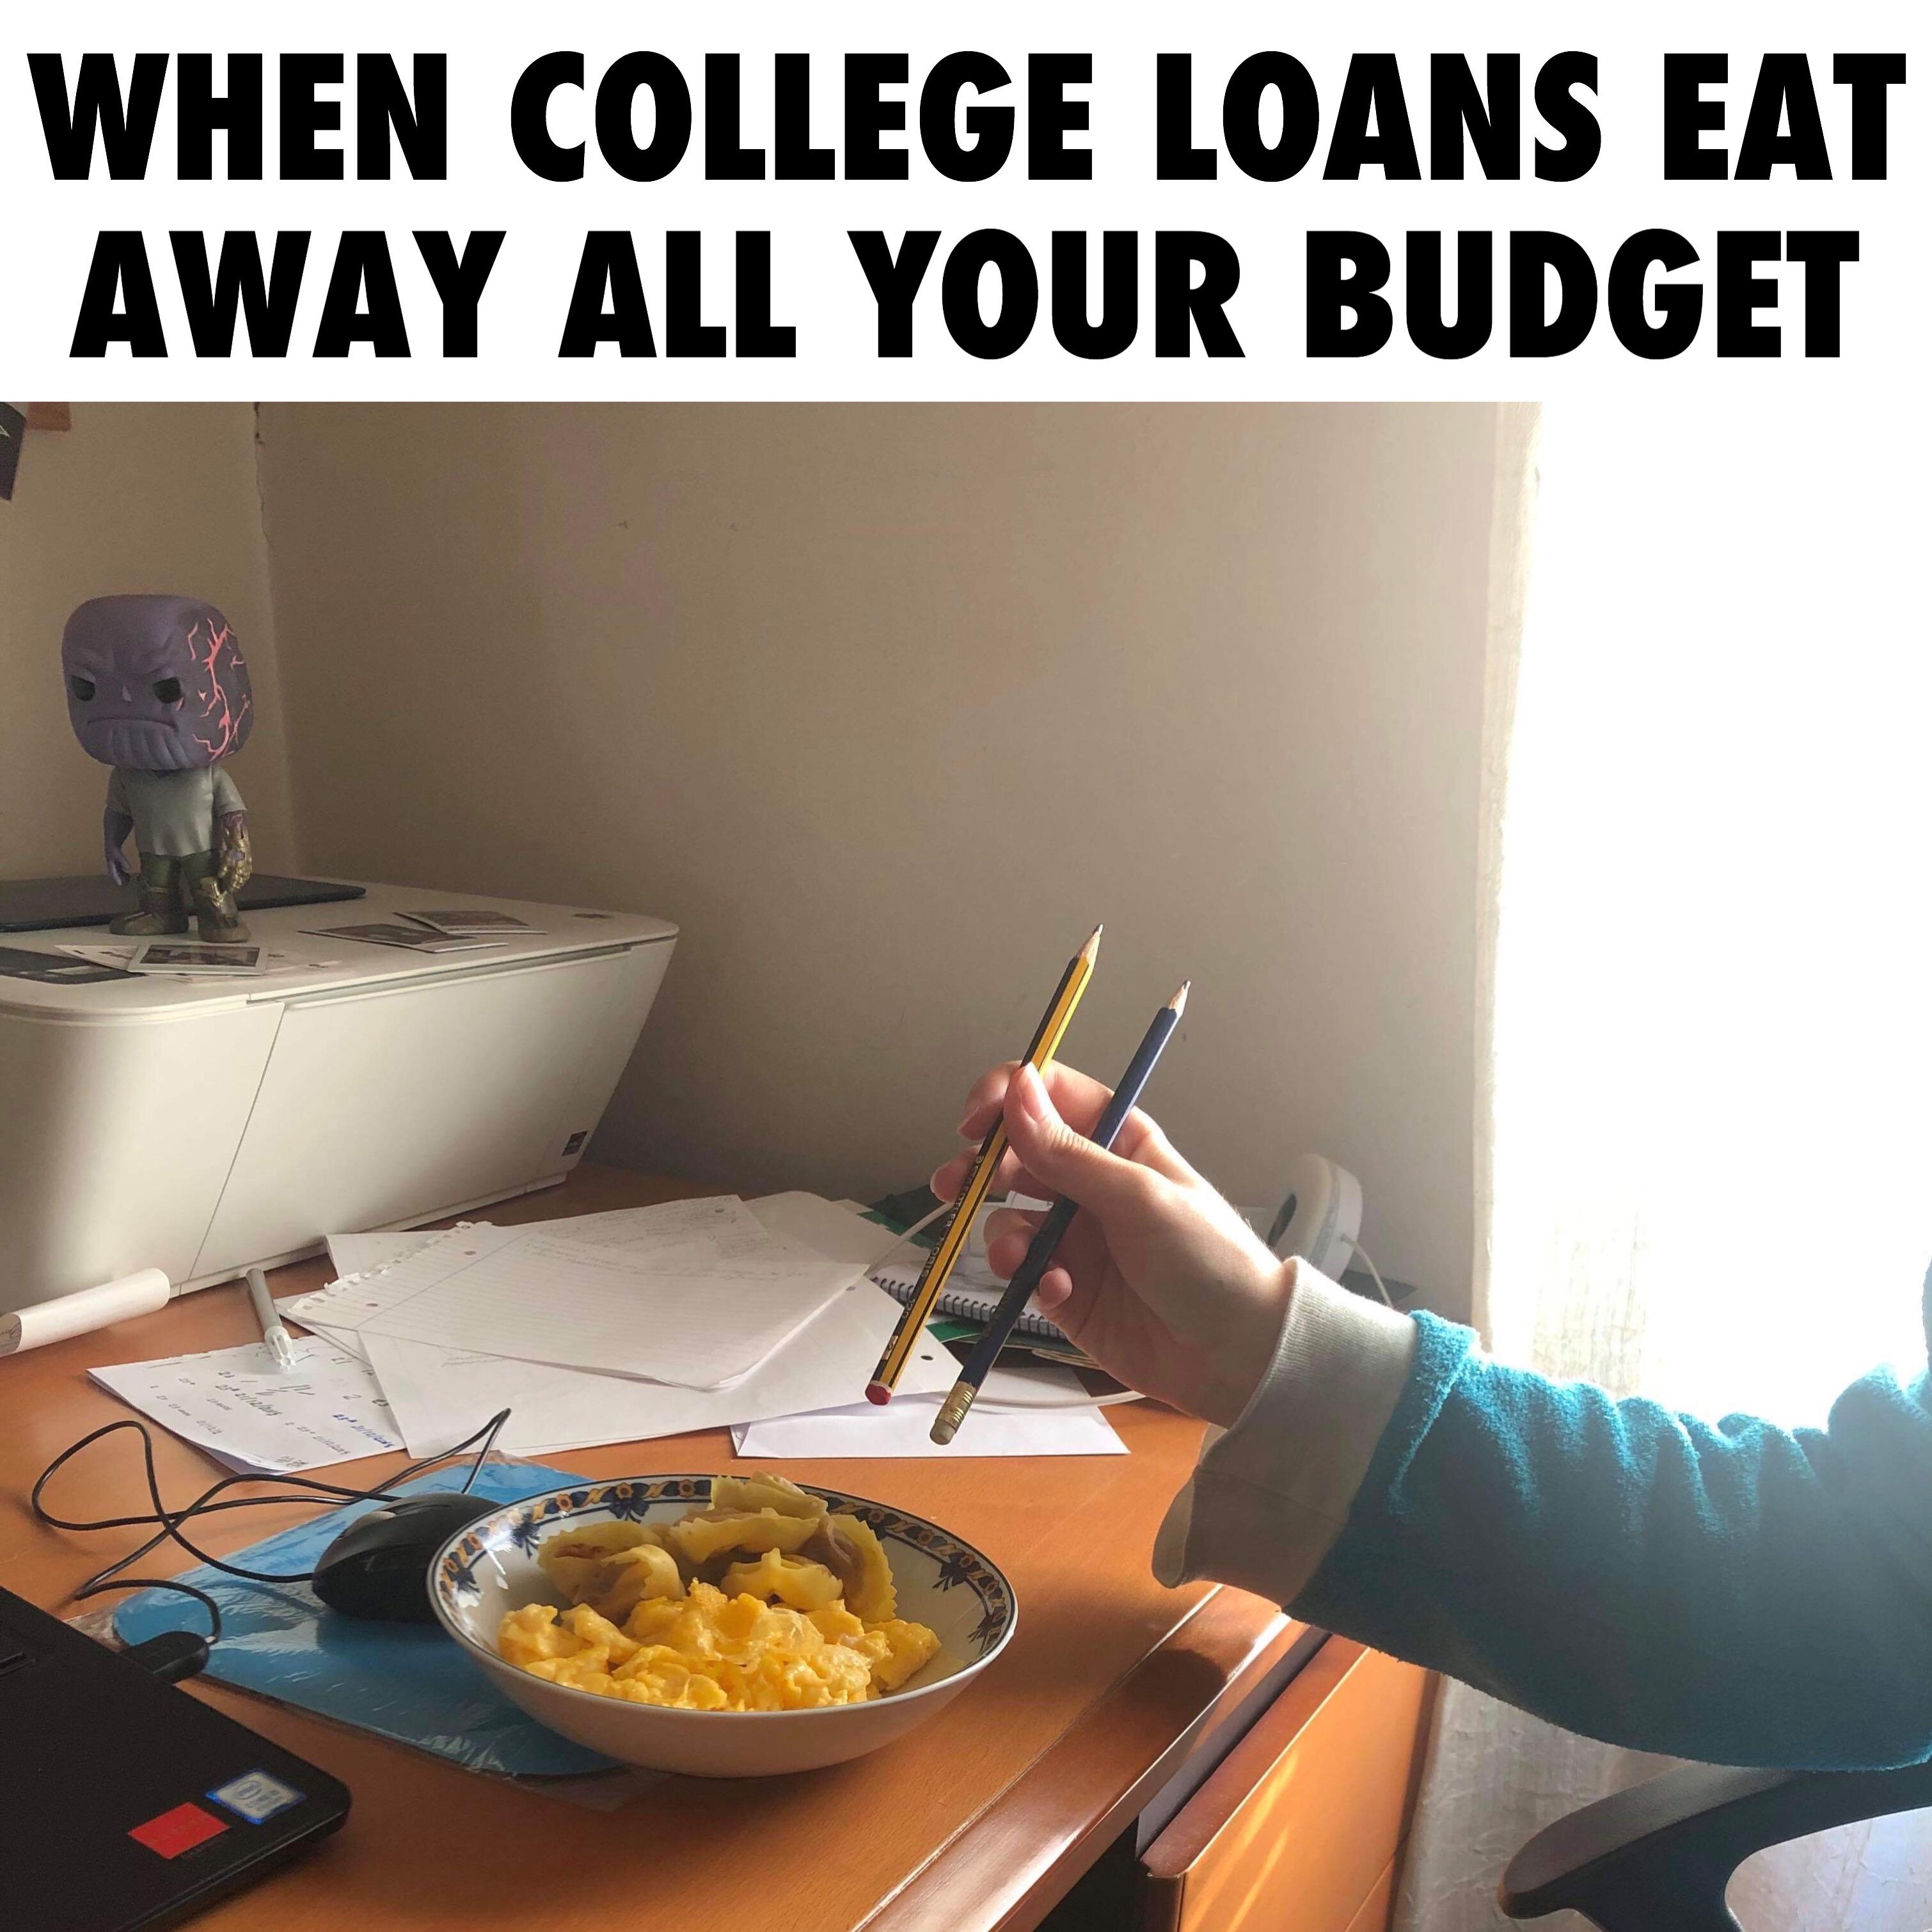 r/collegememes- college dank memes - dish - When College Loans Eat Away All Your Budget